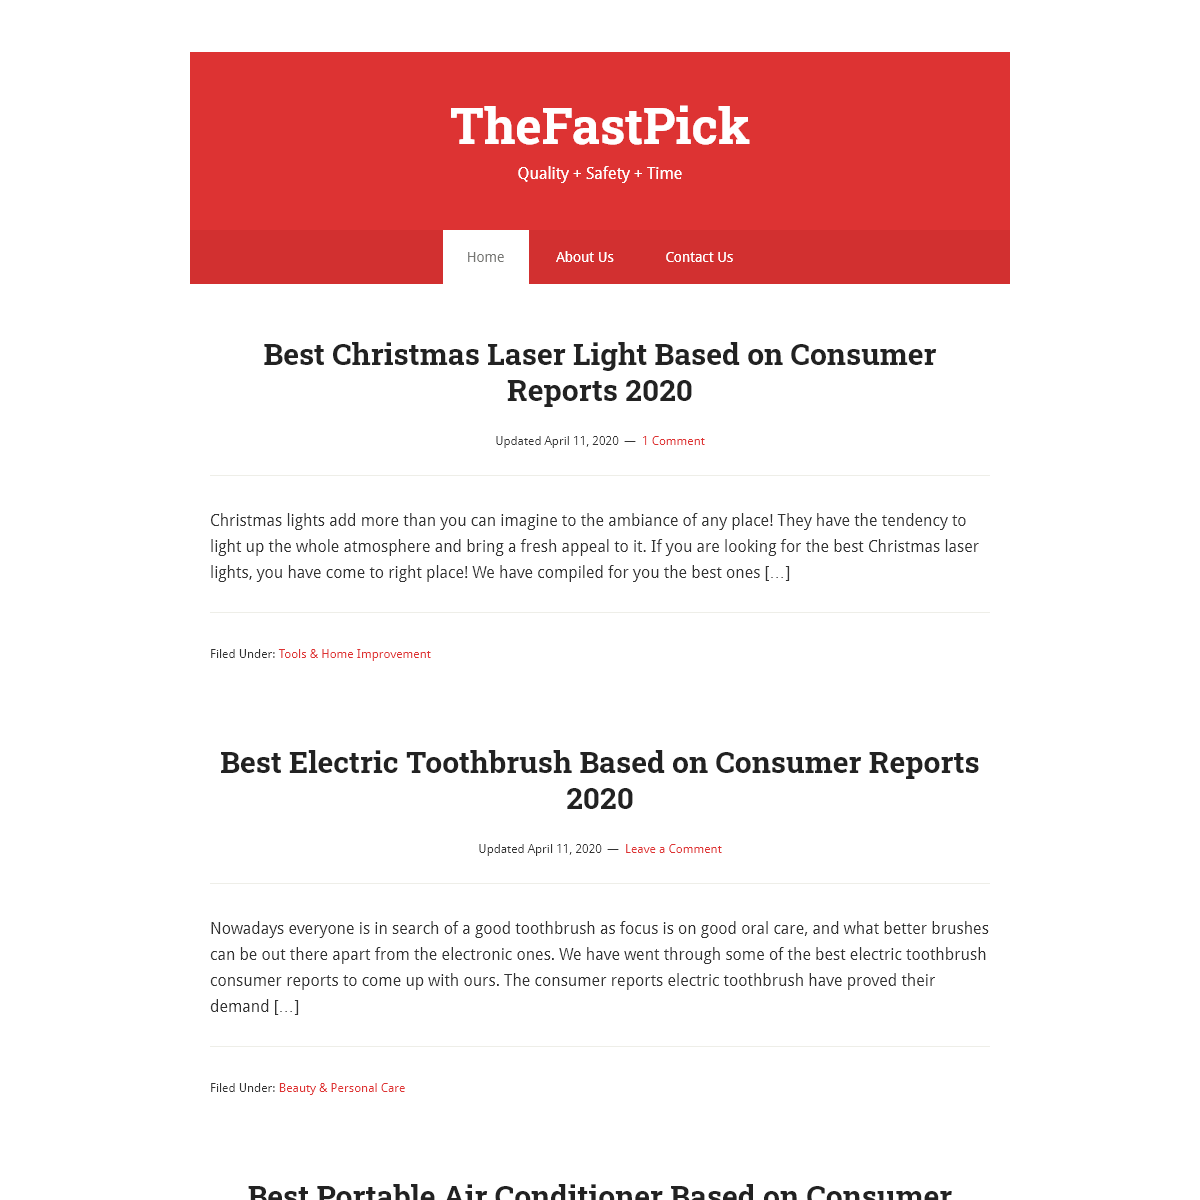 A complete backup of thefastpick.com